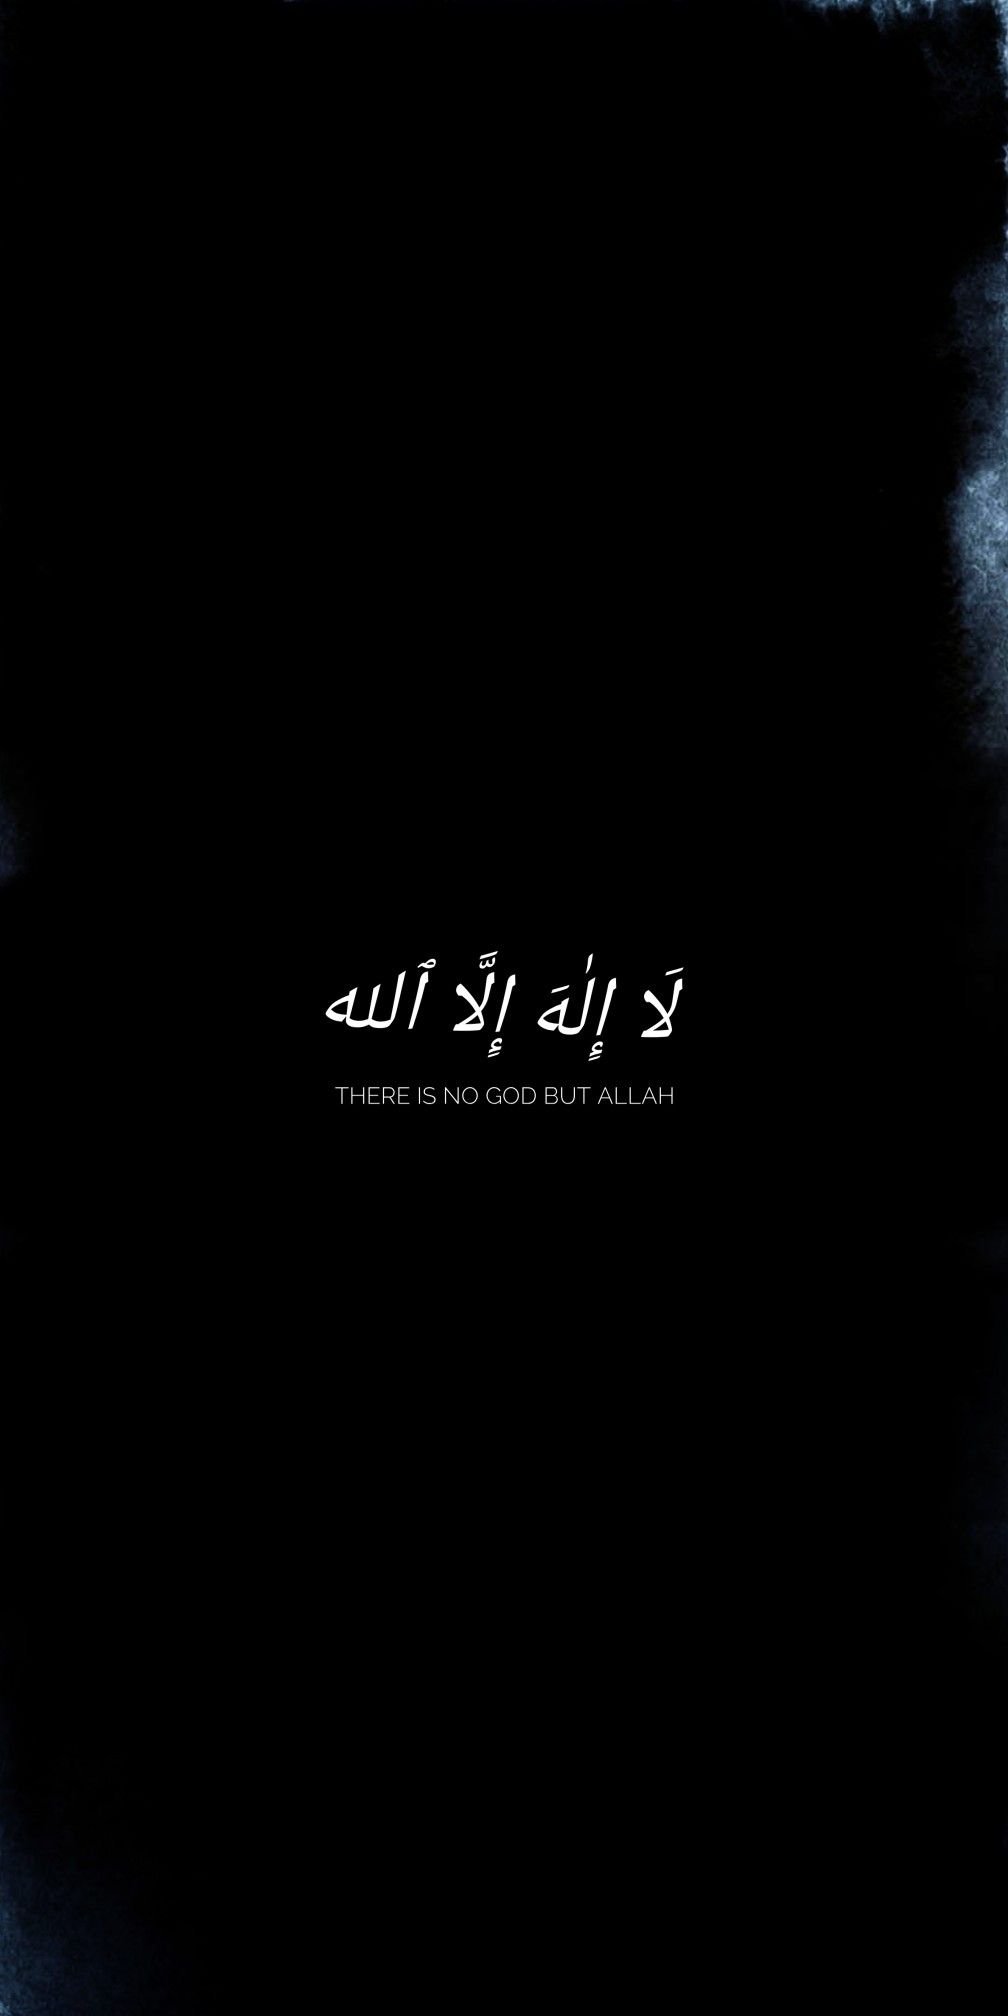 Top 30 Imagen Islamic Quotes Black Background Vn